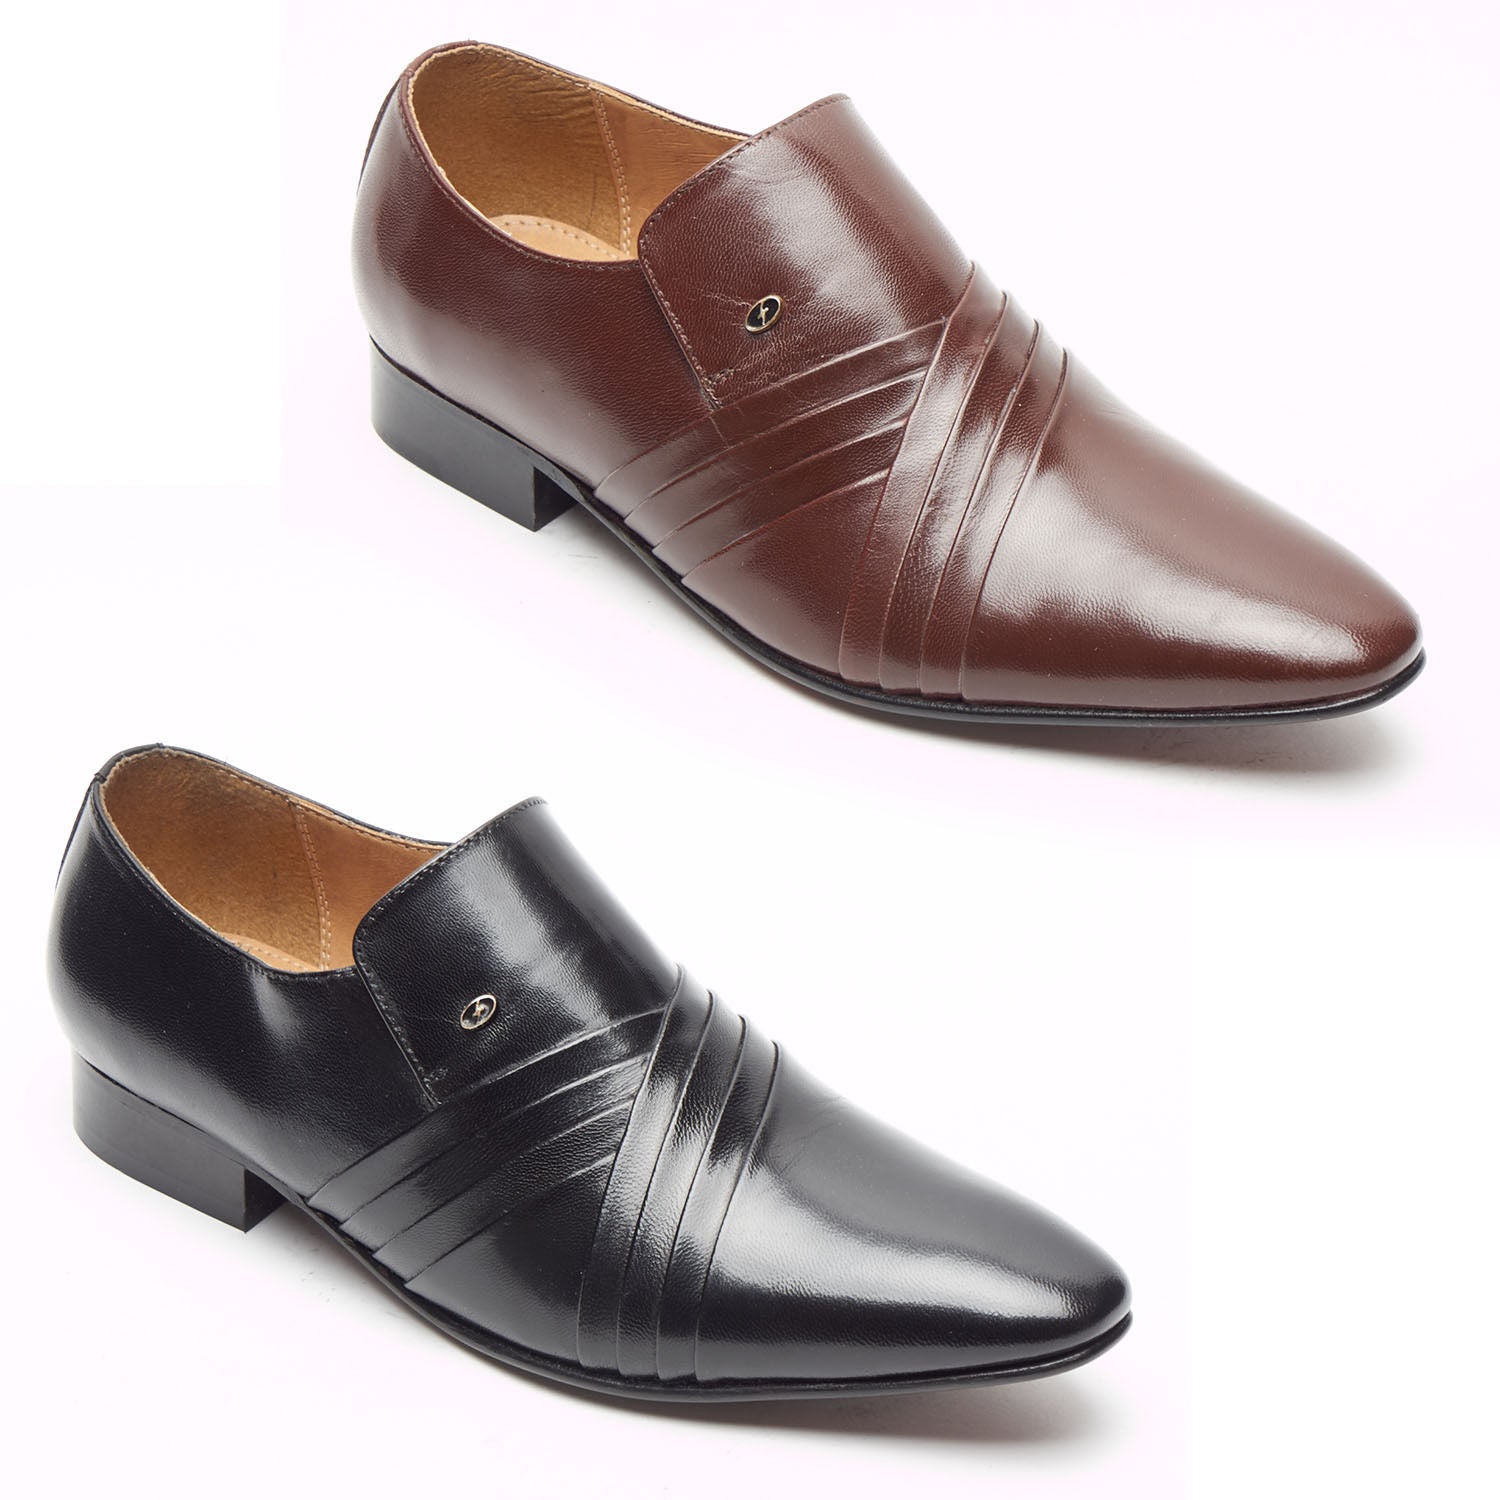 Mens Leather Spanish Shoes - 33452